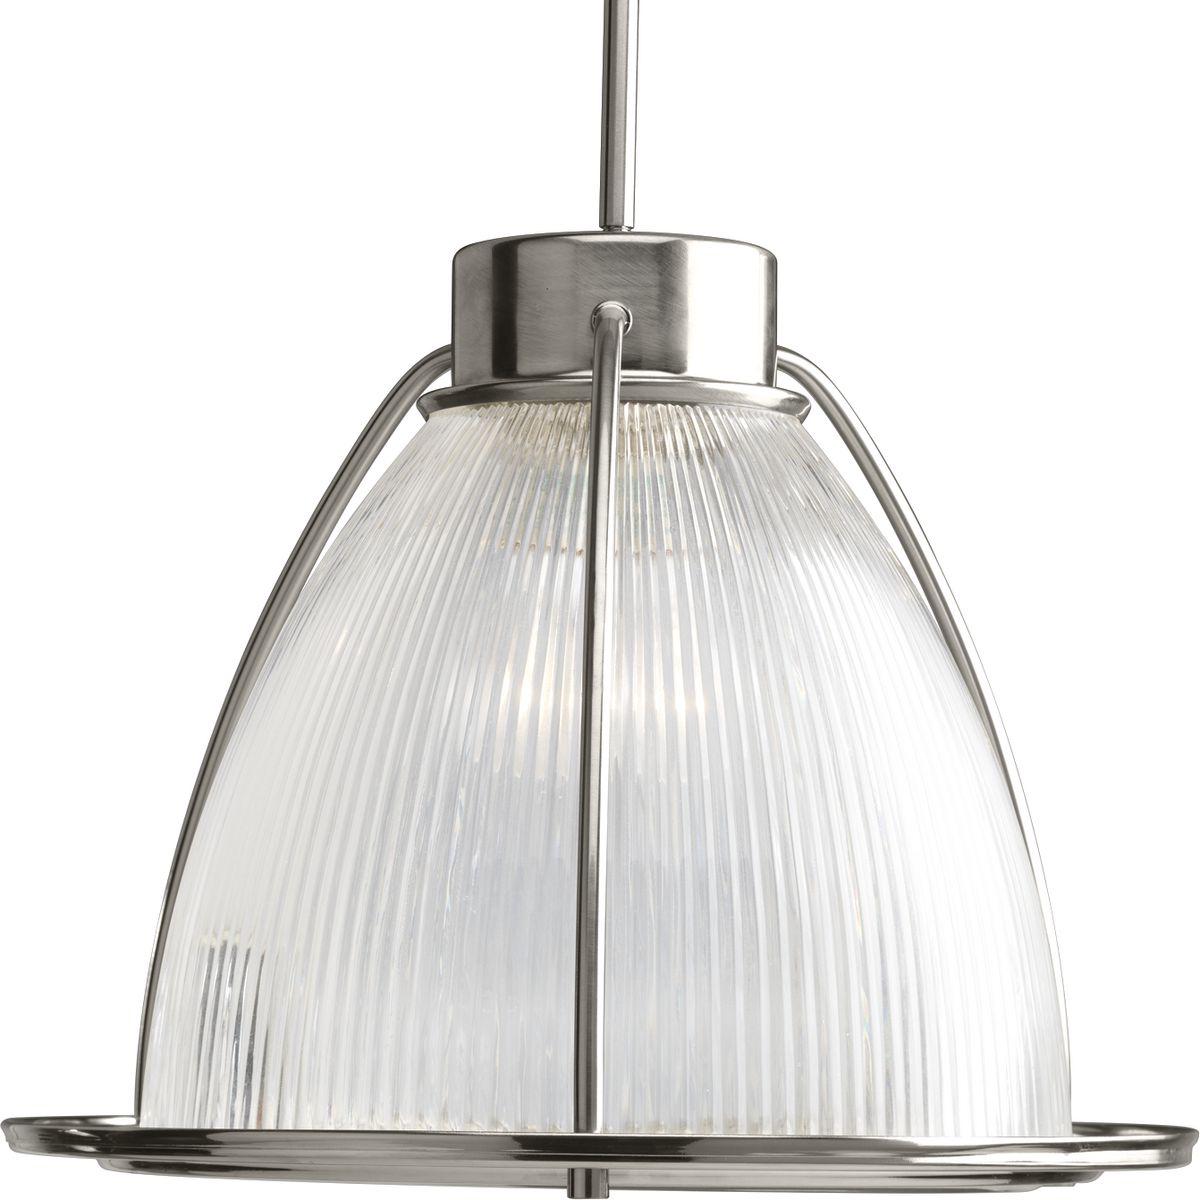 Hubbell P5183-09 One-light 16" pendant with prismatic glass shade for a sleek industrial look. Clear prismatic glass is highlighted with brushed nickel accents.  ; Brushed Nickel finish. ; Bold and striking Prismatic Glass shade. ; A sleek industrial look. ; Includes two 